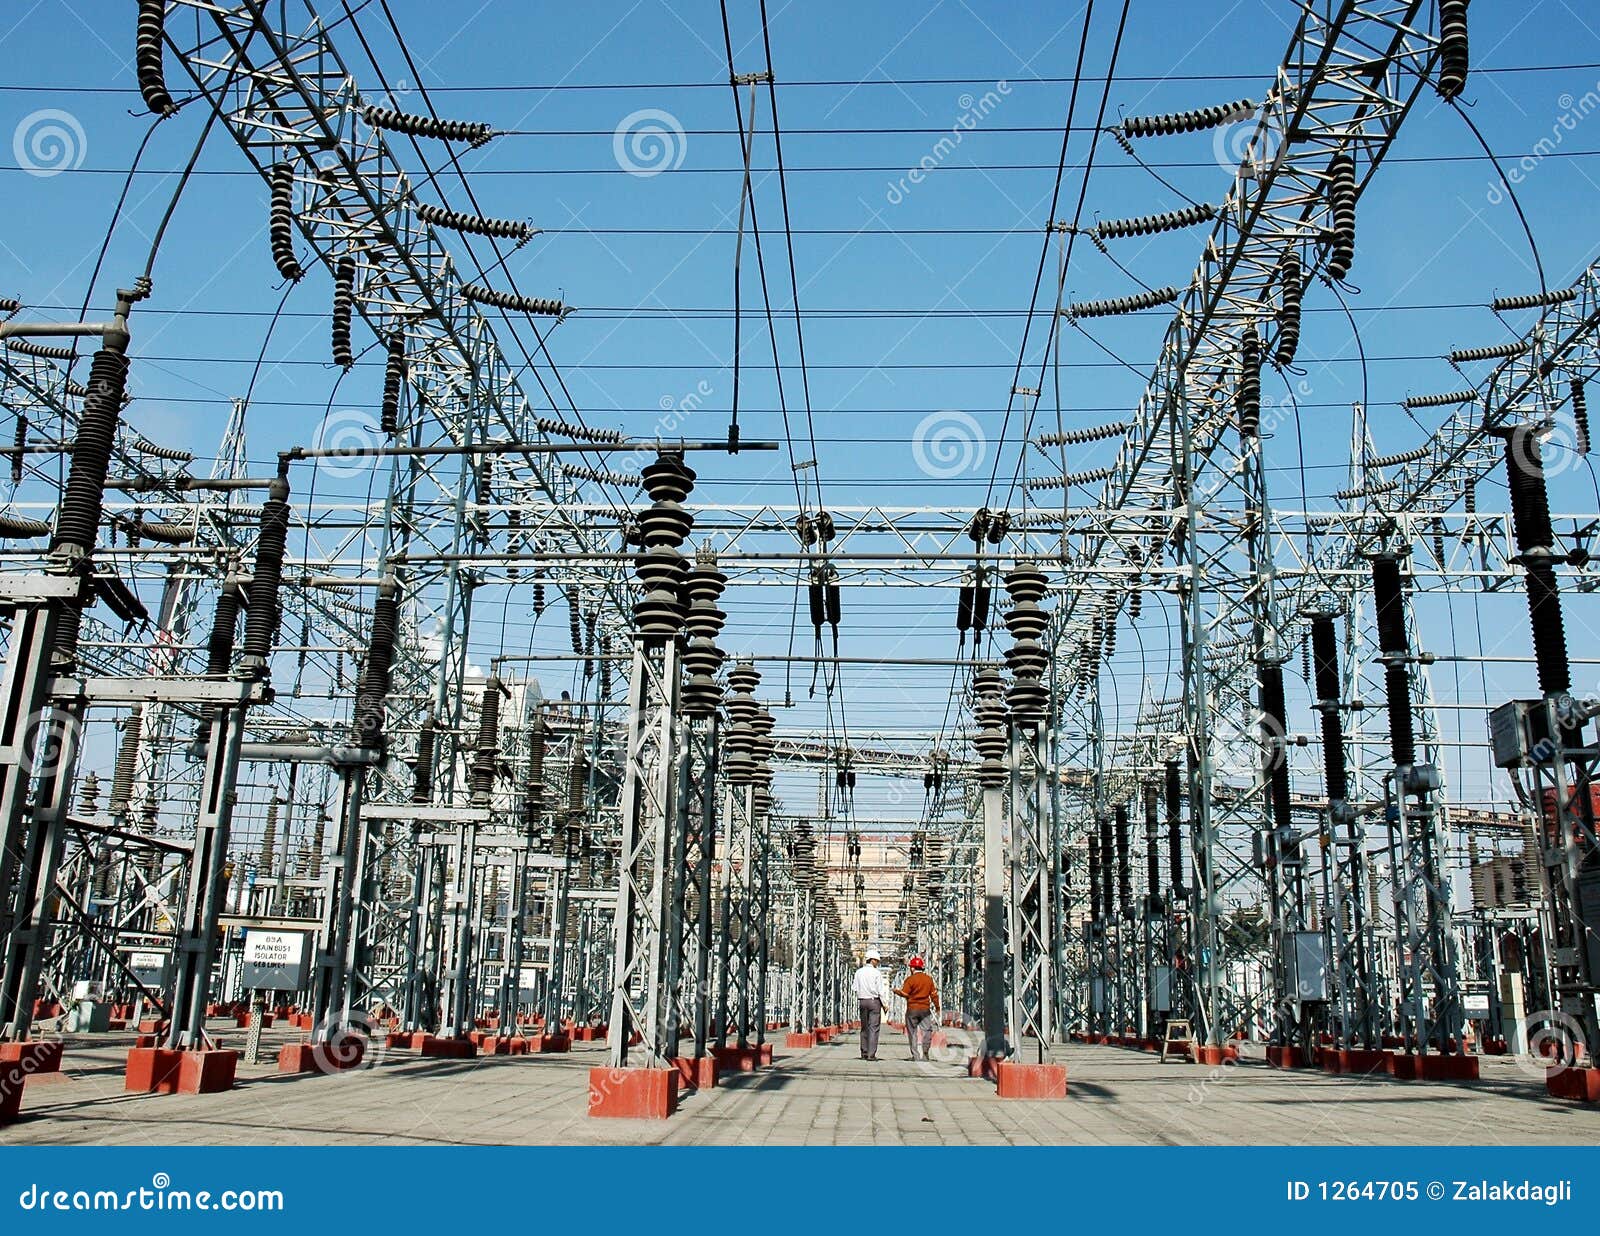 electricity-industry-technology-power-power-line-1264705.jpg